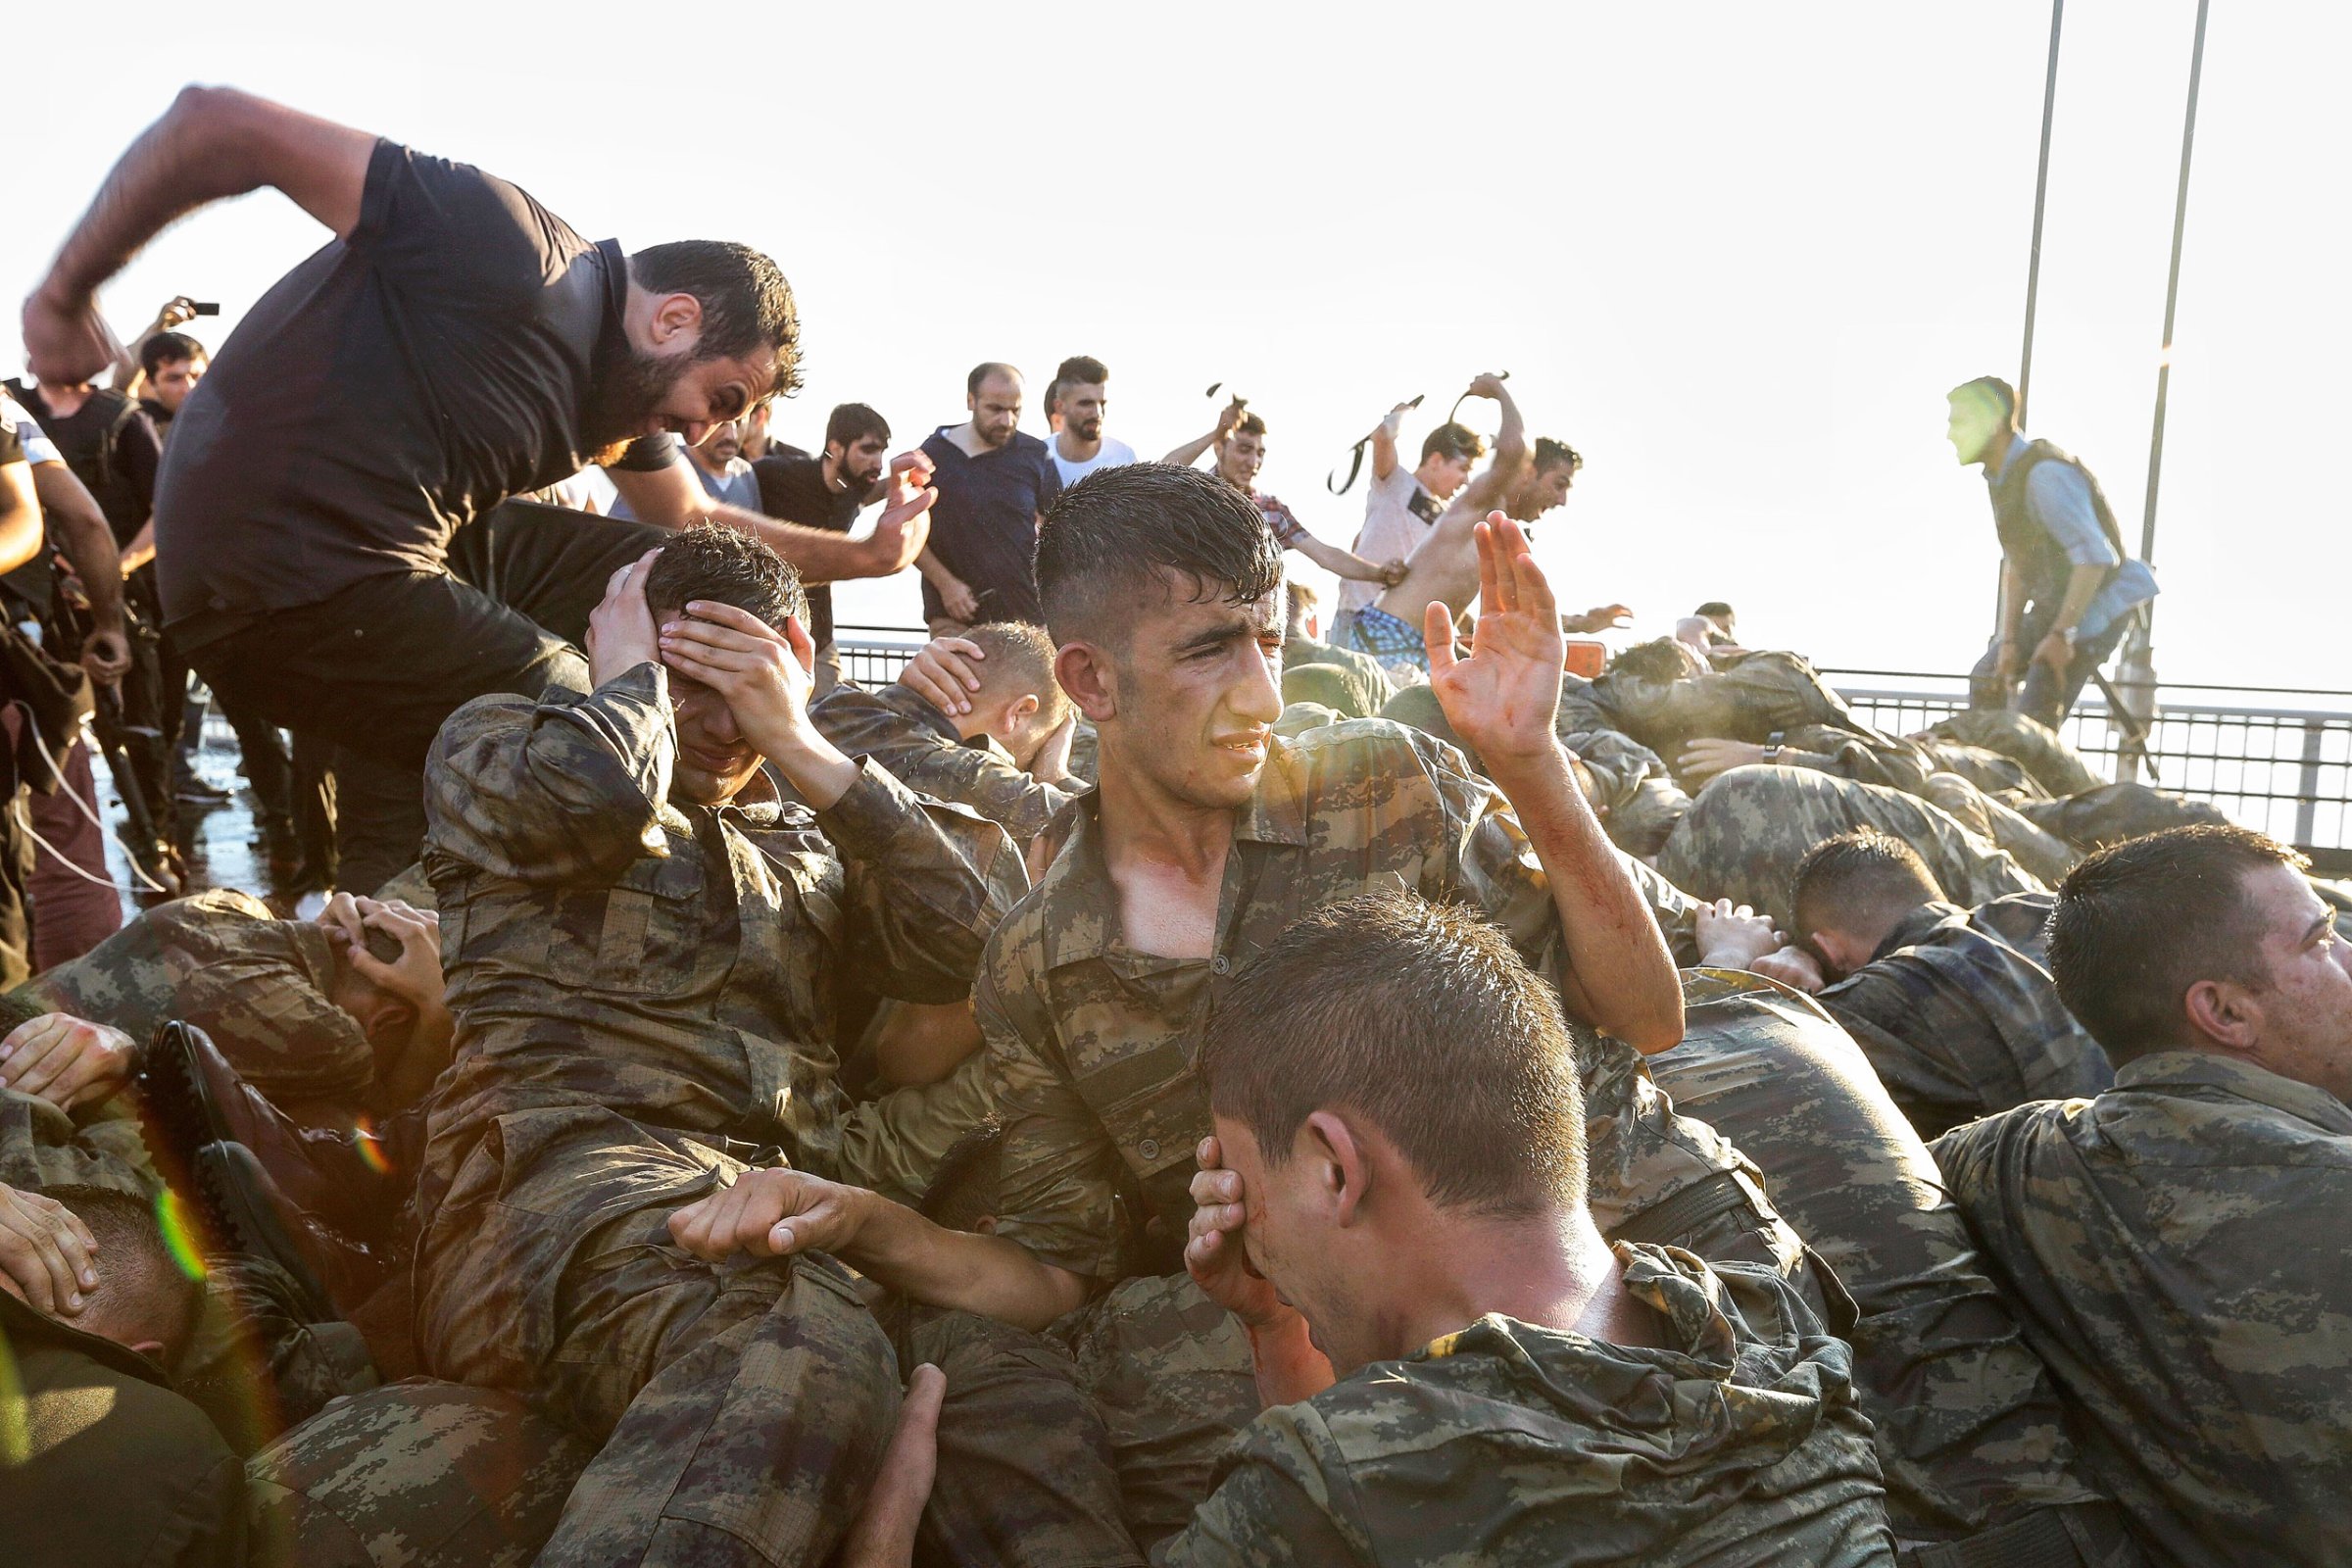 Soldiers involved in the attempted coup surrender on the Bosporus Bridge in Istanbul early on July 16; thousands of suspected plotters were later rounded up